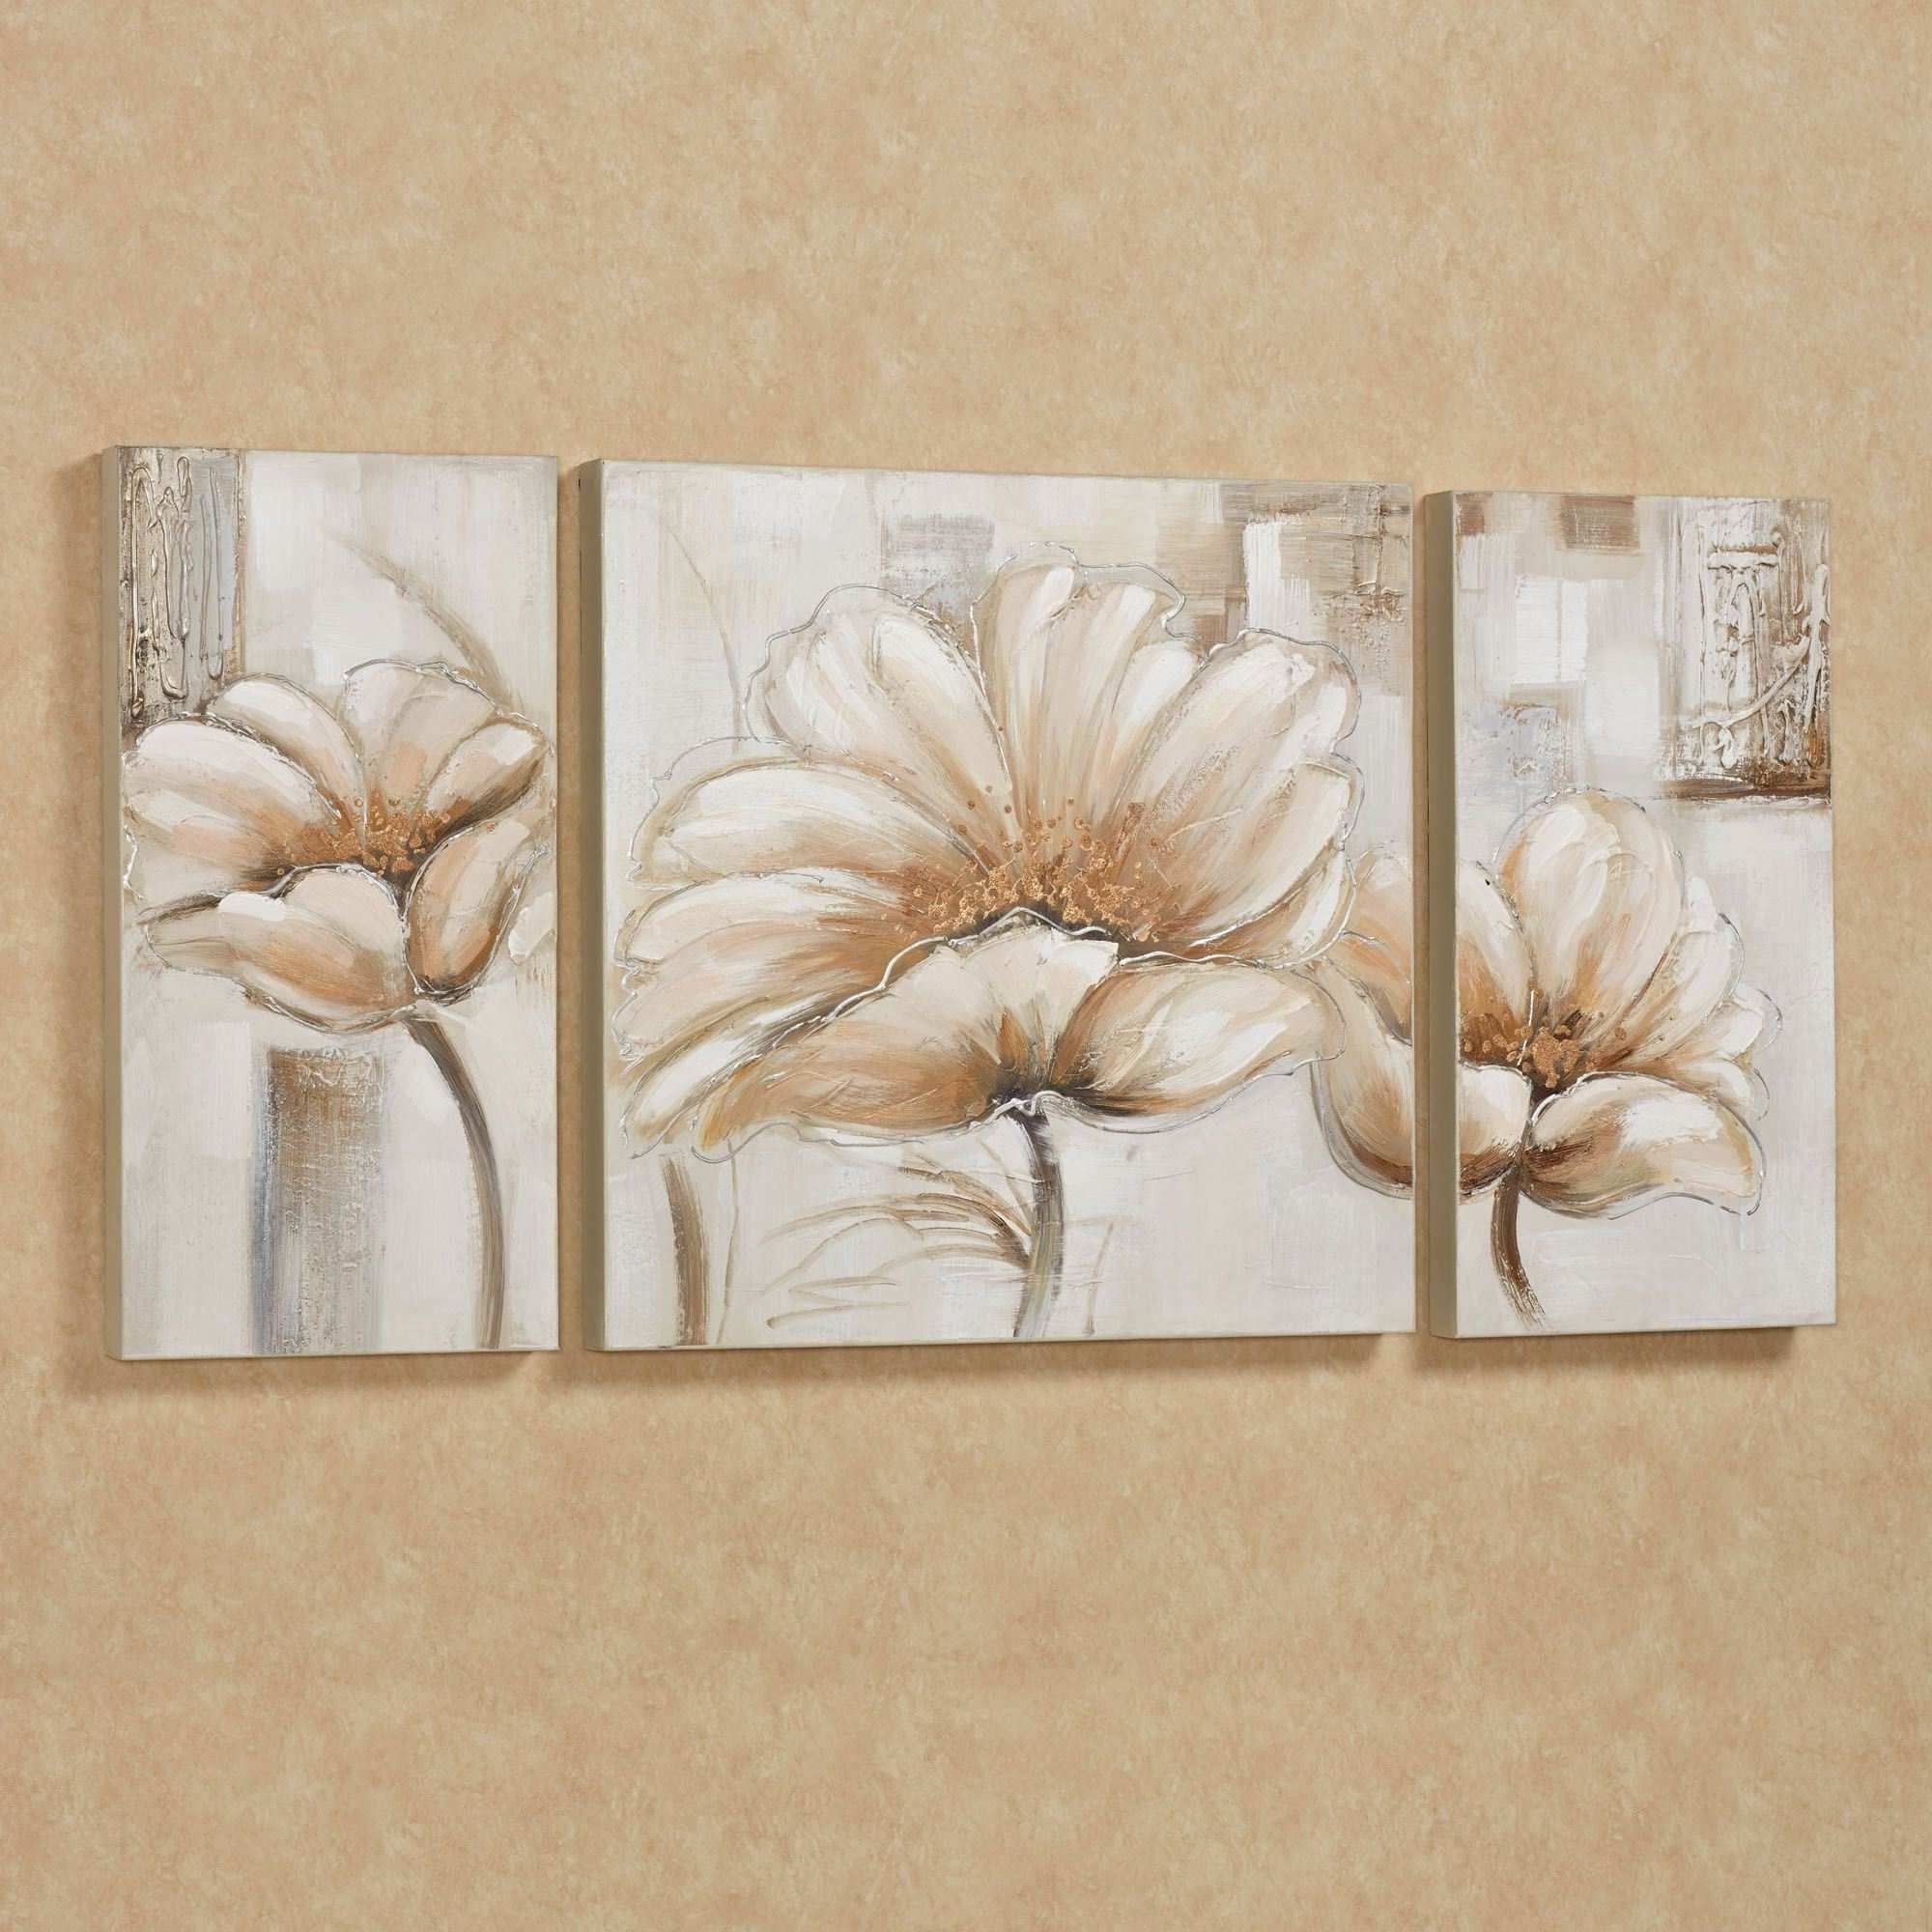 Popular Canvas Wall Art Ideas Awesome Blooming Splendor Floral Triptych Pertaining To Floral Canvas Wall Art (View 7 of 20)